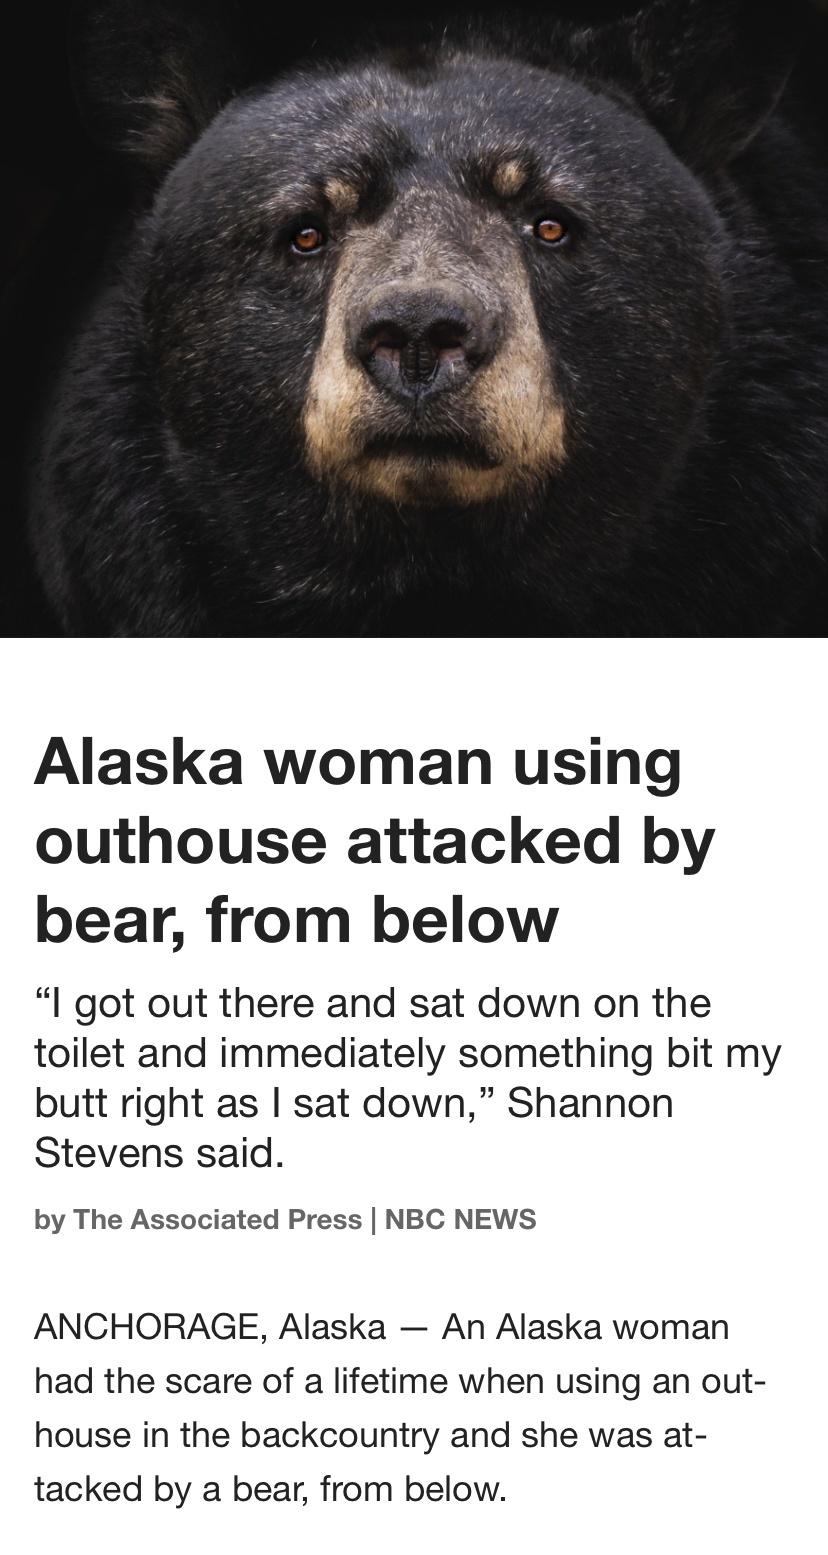 fauna - Alaska woman using outhouse attacked by bear, from below "I got out there and sat down on the toilet and immediately something bit my butt right as I sat down," Shannon Stevens said. by The Associated Press Nbc News Anchorage, Alaska An Alaska wom